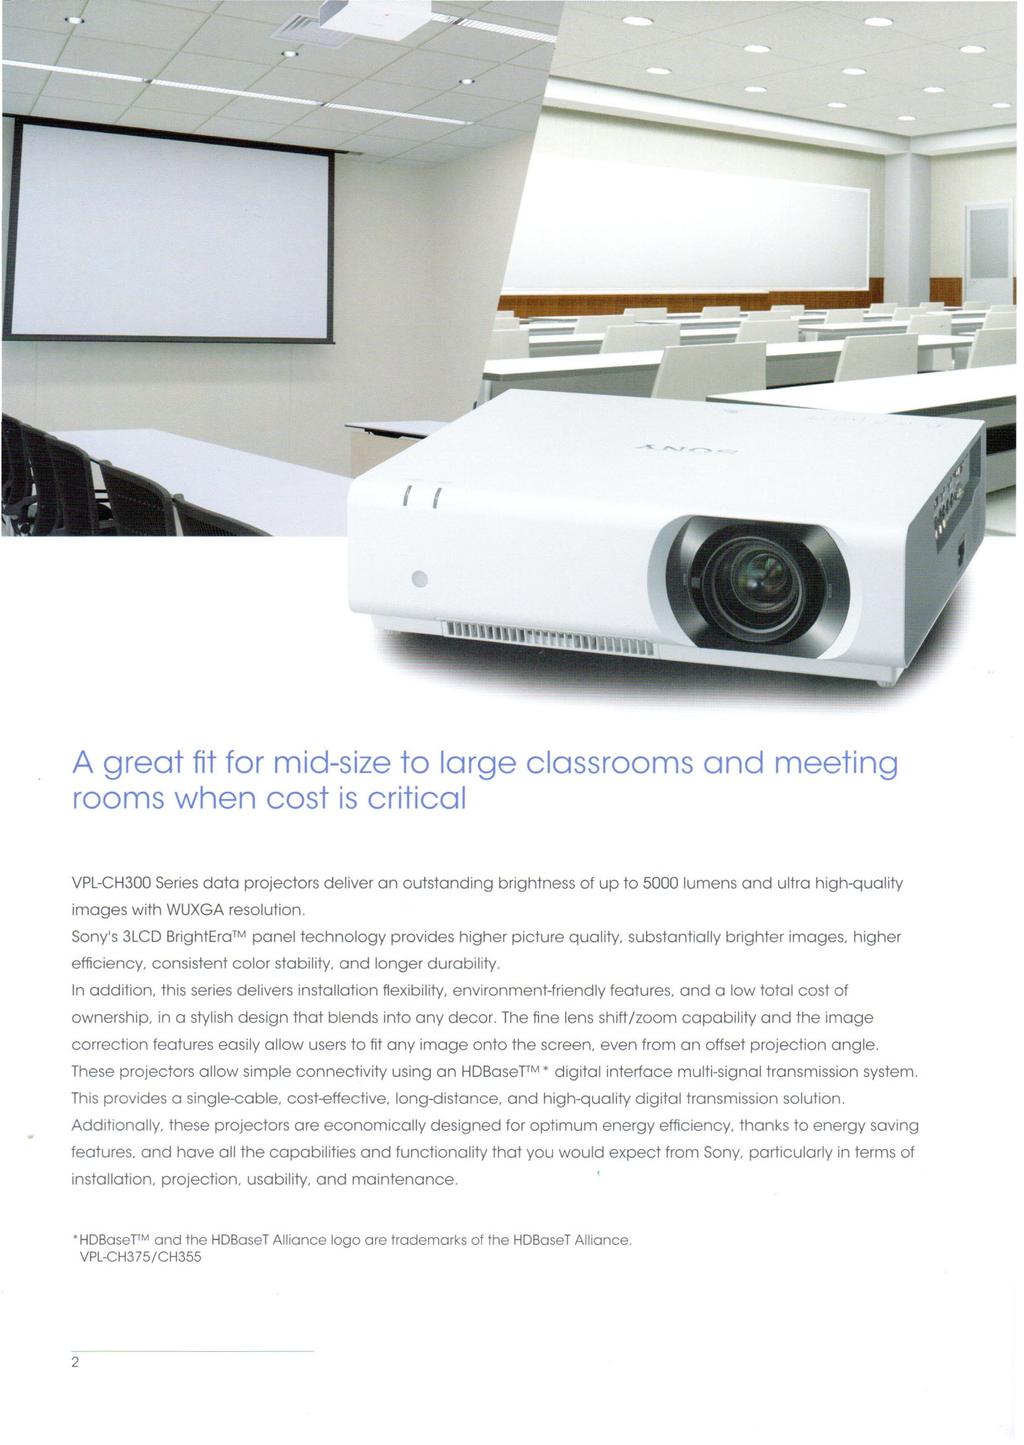 A great fit for mid-size to large classrooms and meeting rooms when cost is critical VPL-CH300Seriesdata projectors deliver an outstanding brightness of up to 5000 lumens and ultra high-quality